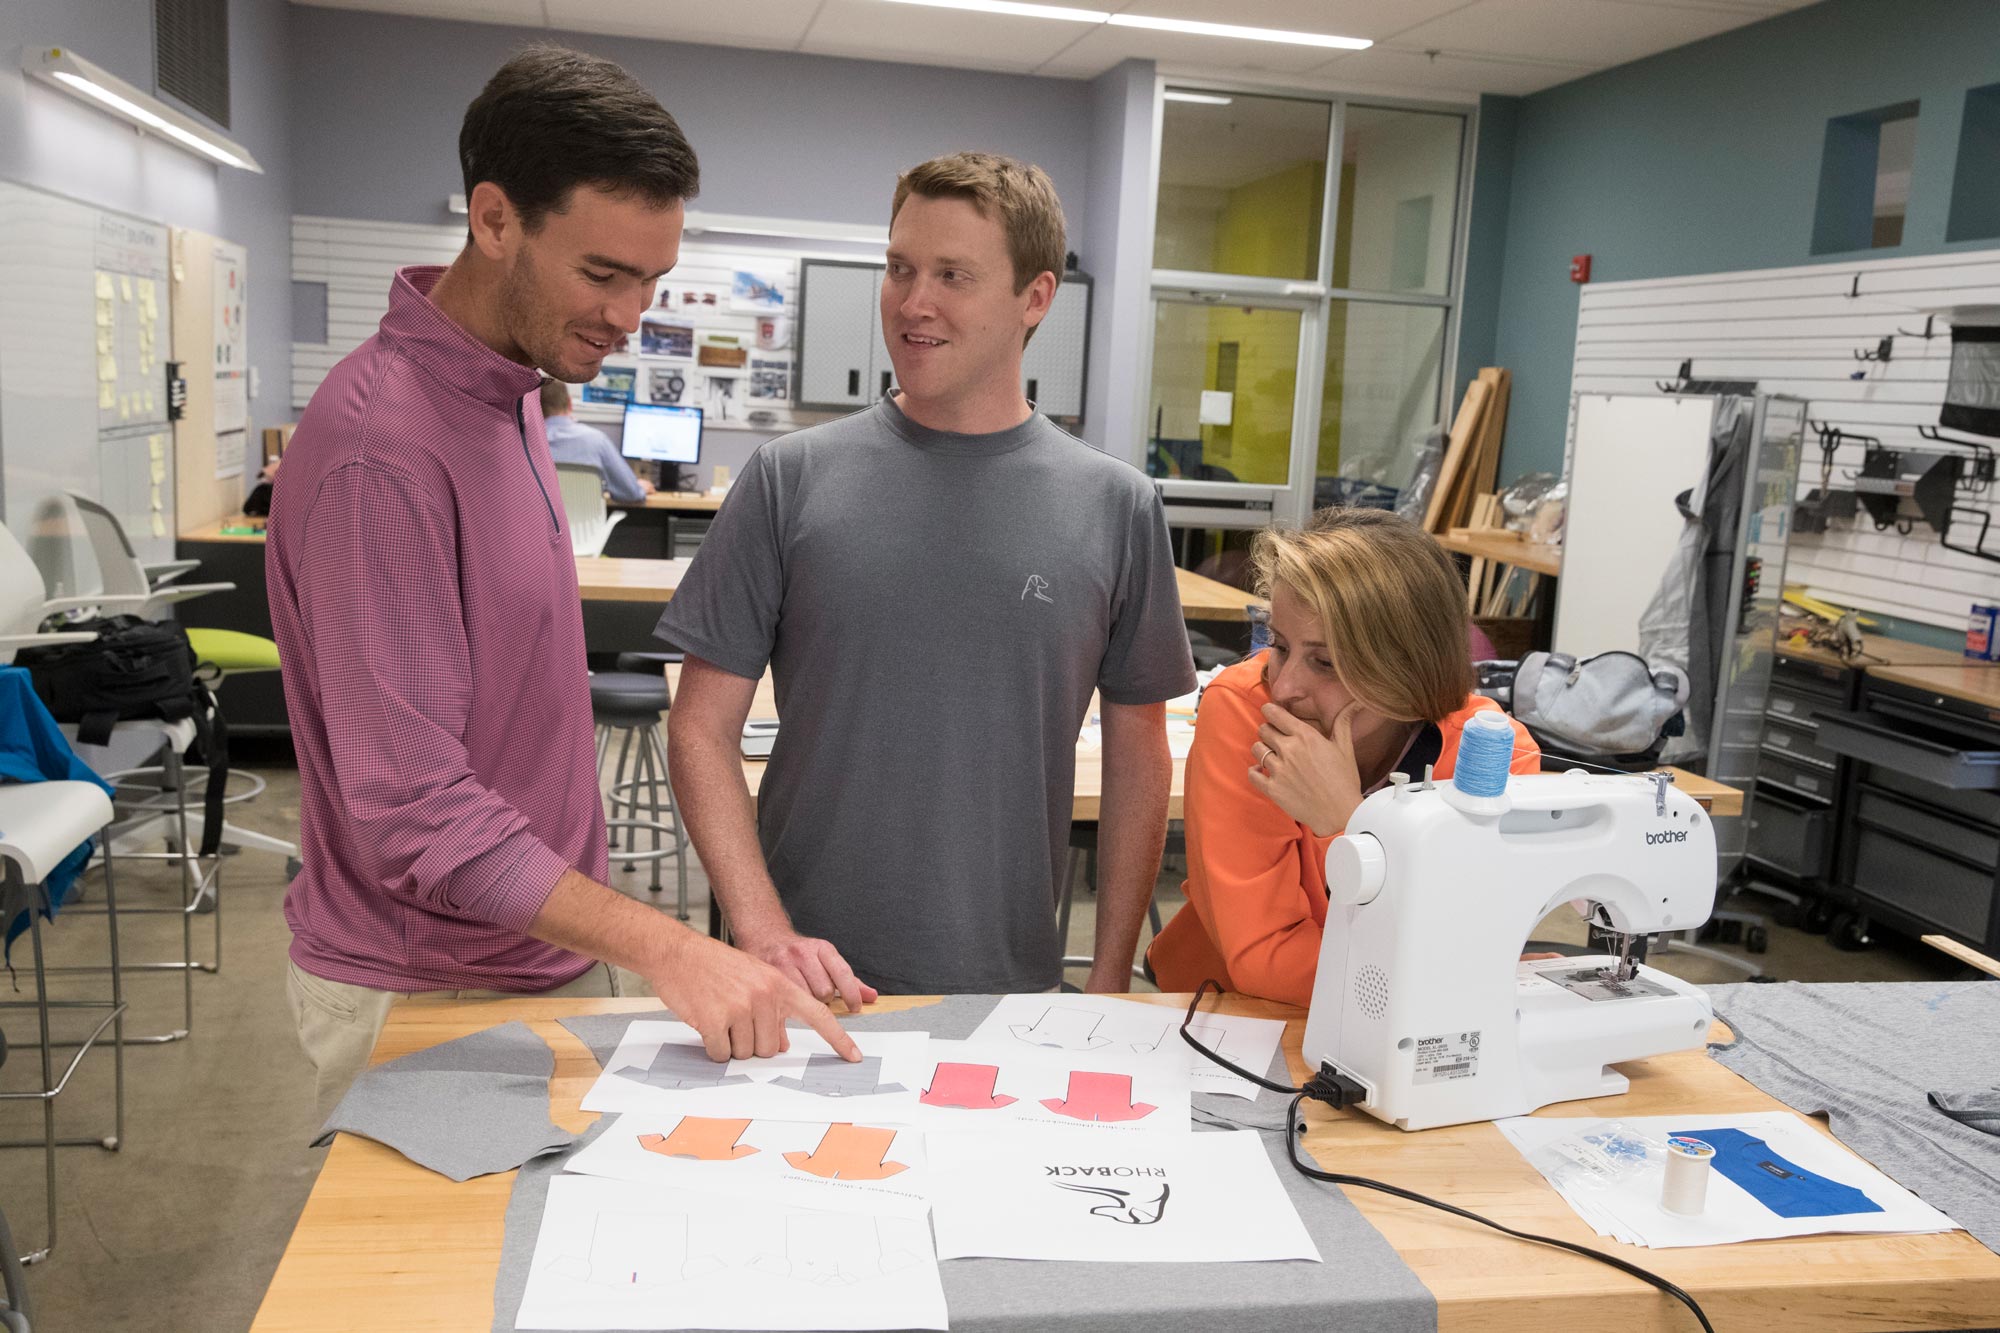 Matt Loftus, left, business partner Kevin Hubbard,middle, and Kristina Loftus, right, stand at a table looking at shirt designs